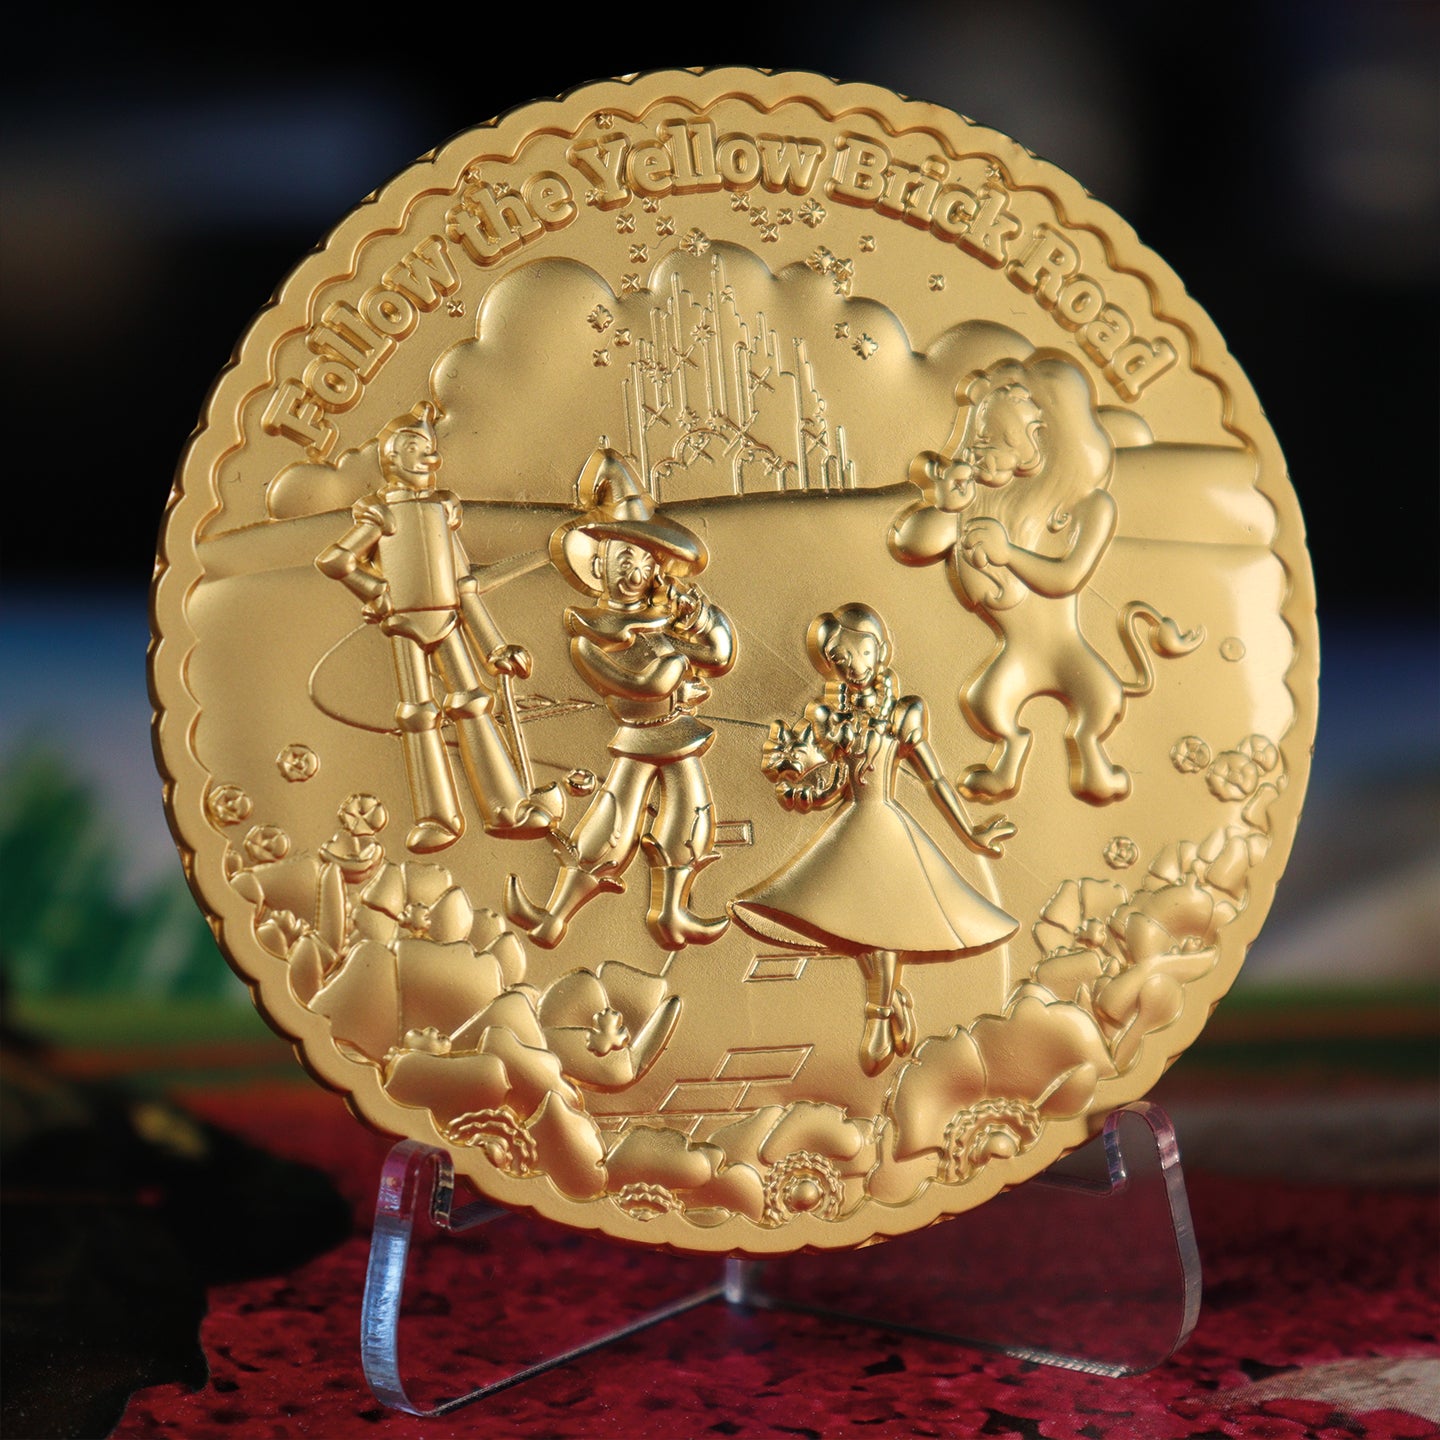 The Wizard of Oz Limited Edition Medallion